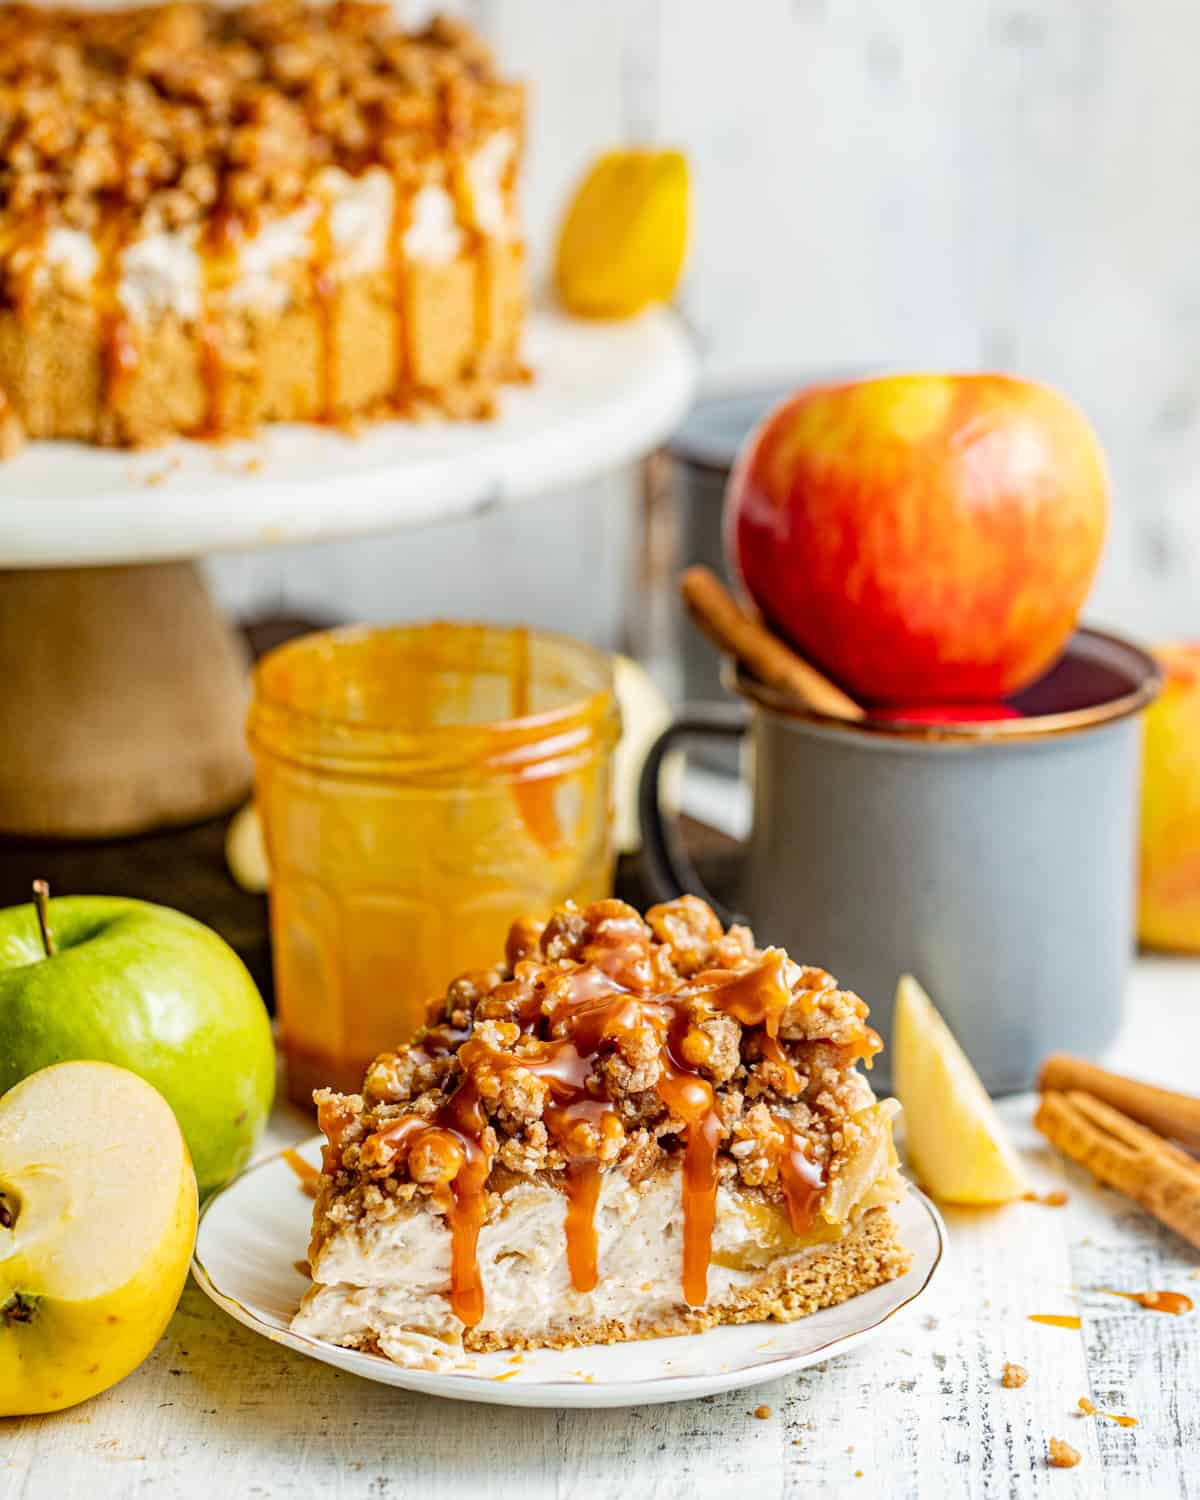 Apple Pie Stuffed Cheesecake Recipe: Delicious and Easy!